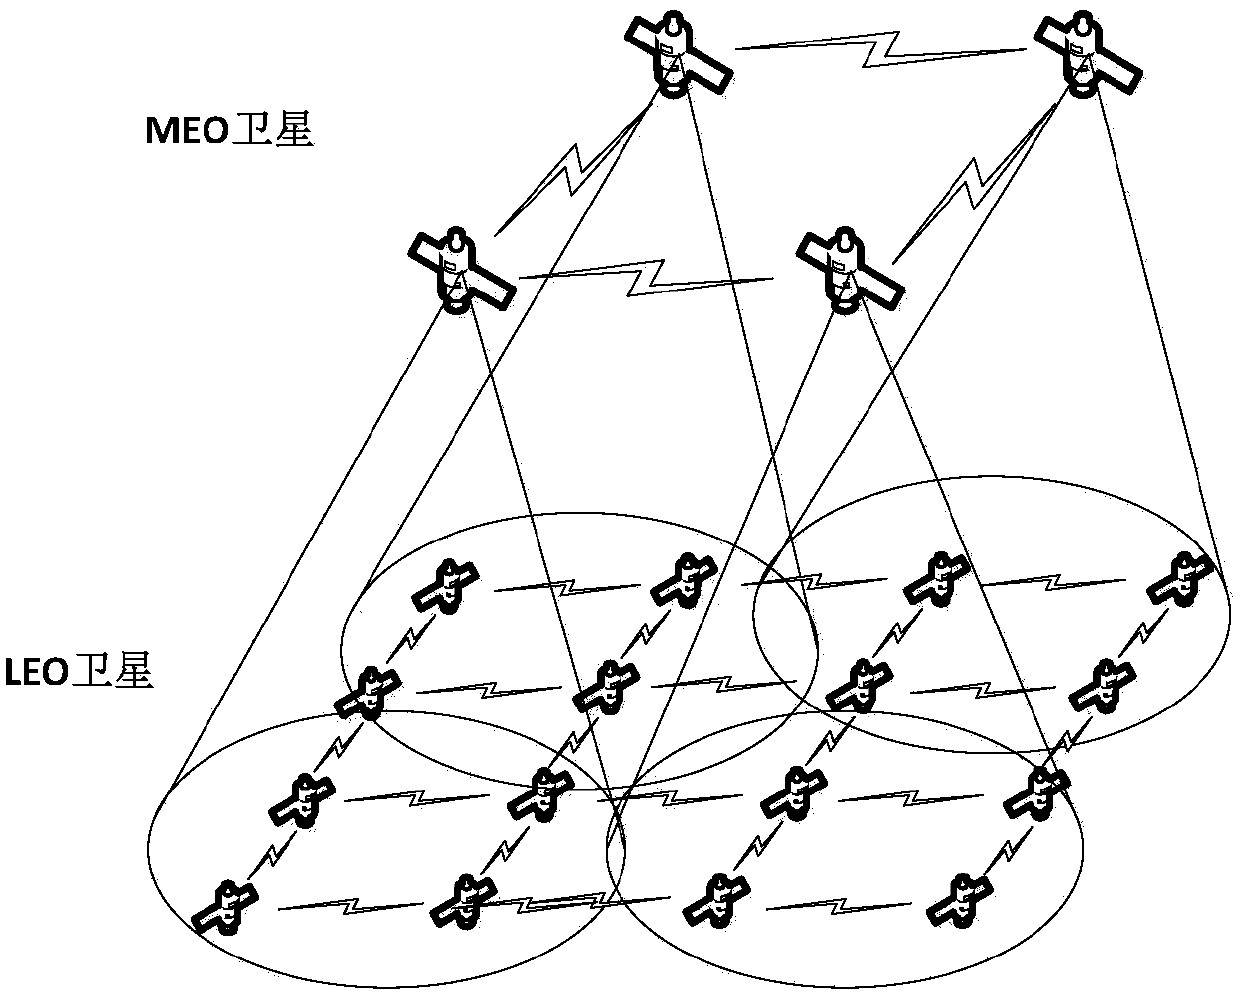 LEO/MEO double-layer satellite network low-overhead flooding method and satellite node